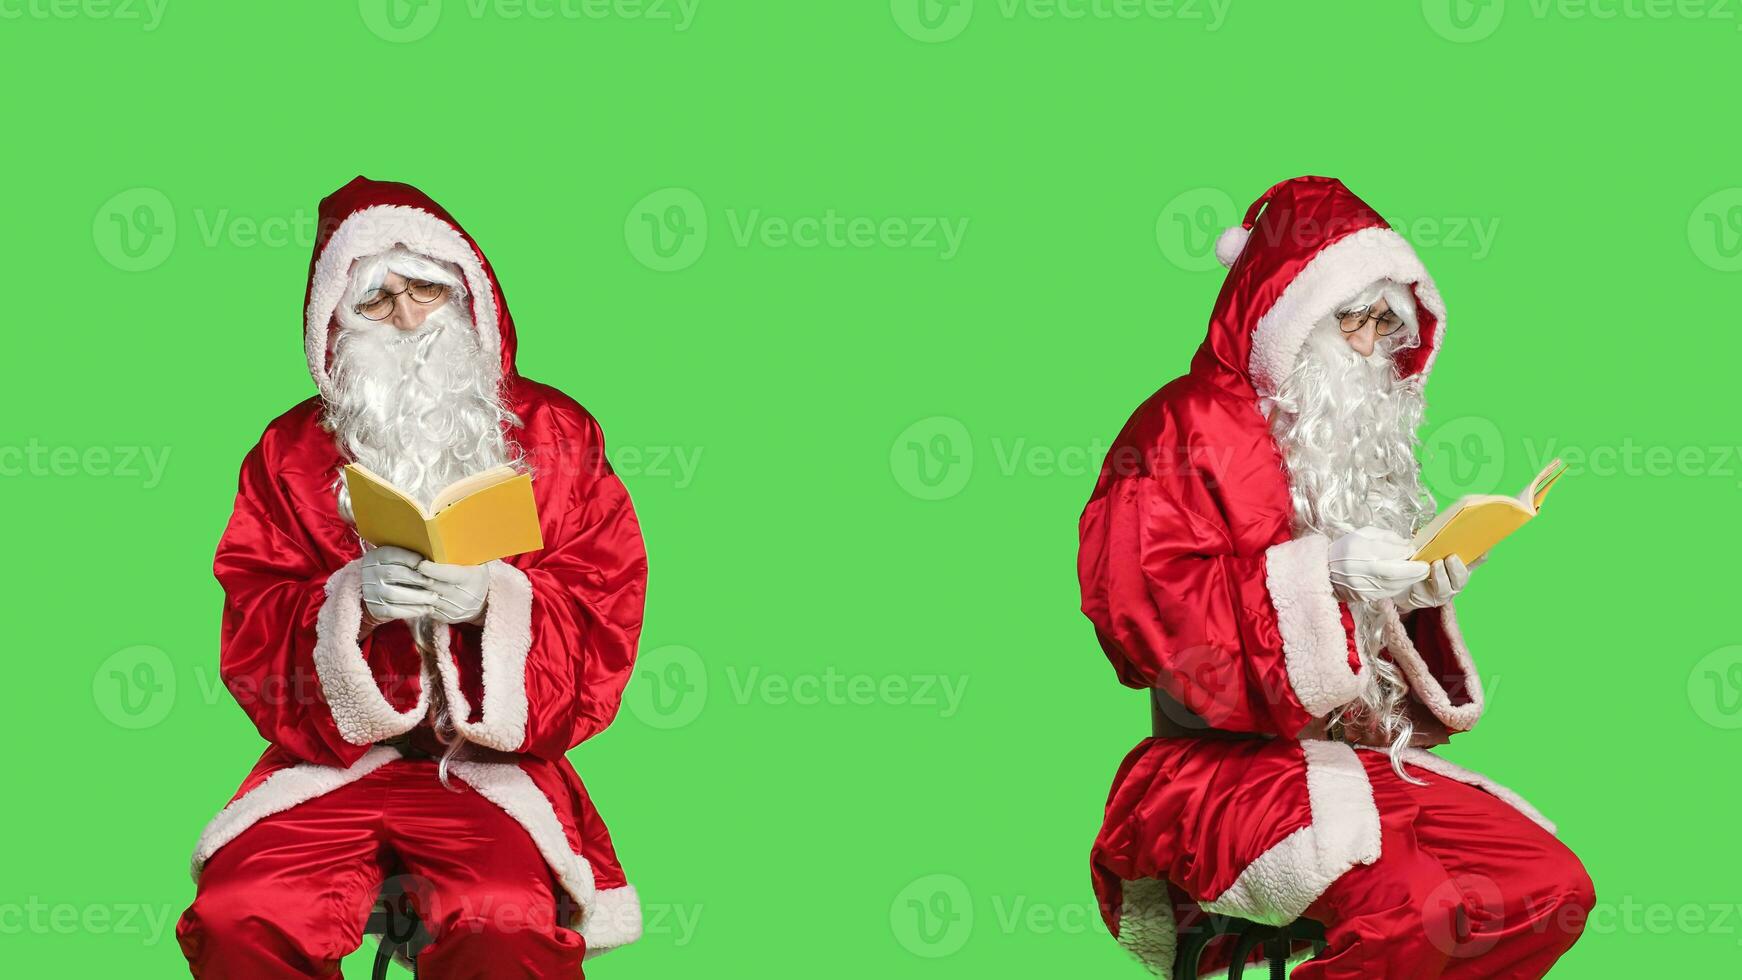 Santa reads literature sitting on chair, man wearing festive red costume while he is reading poetry book over greenscreen backdrop. Father christmas enjoying fairytale story, winter holiday. photo